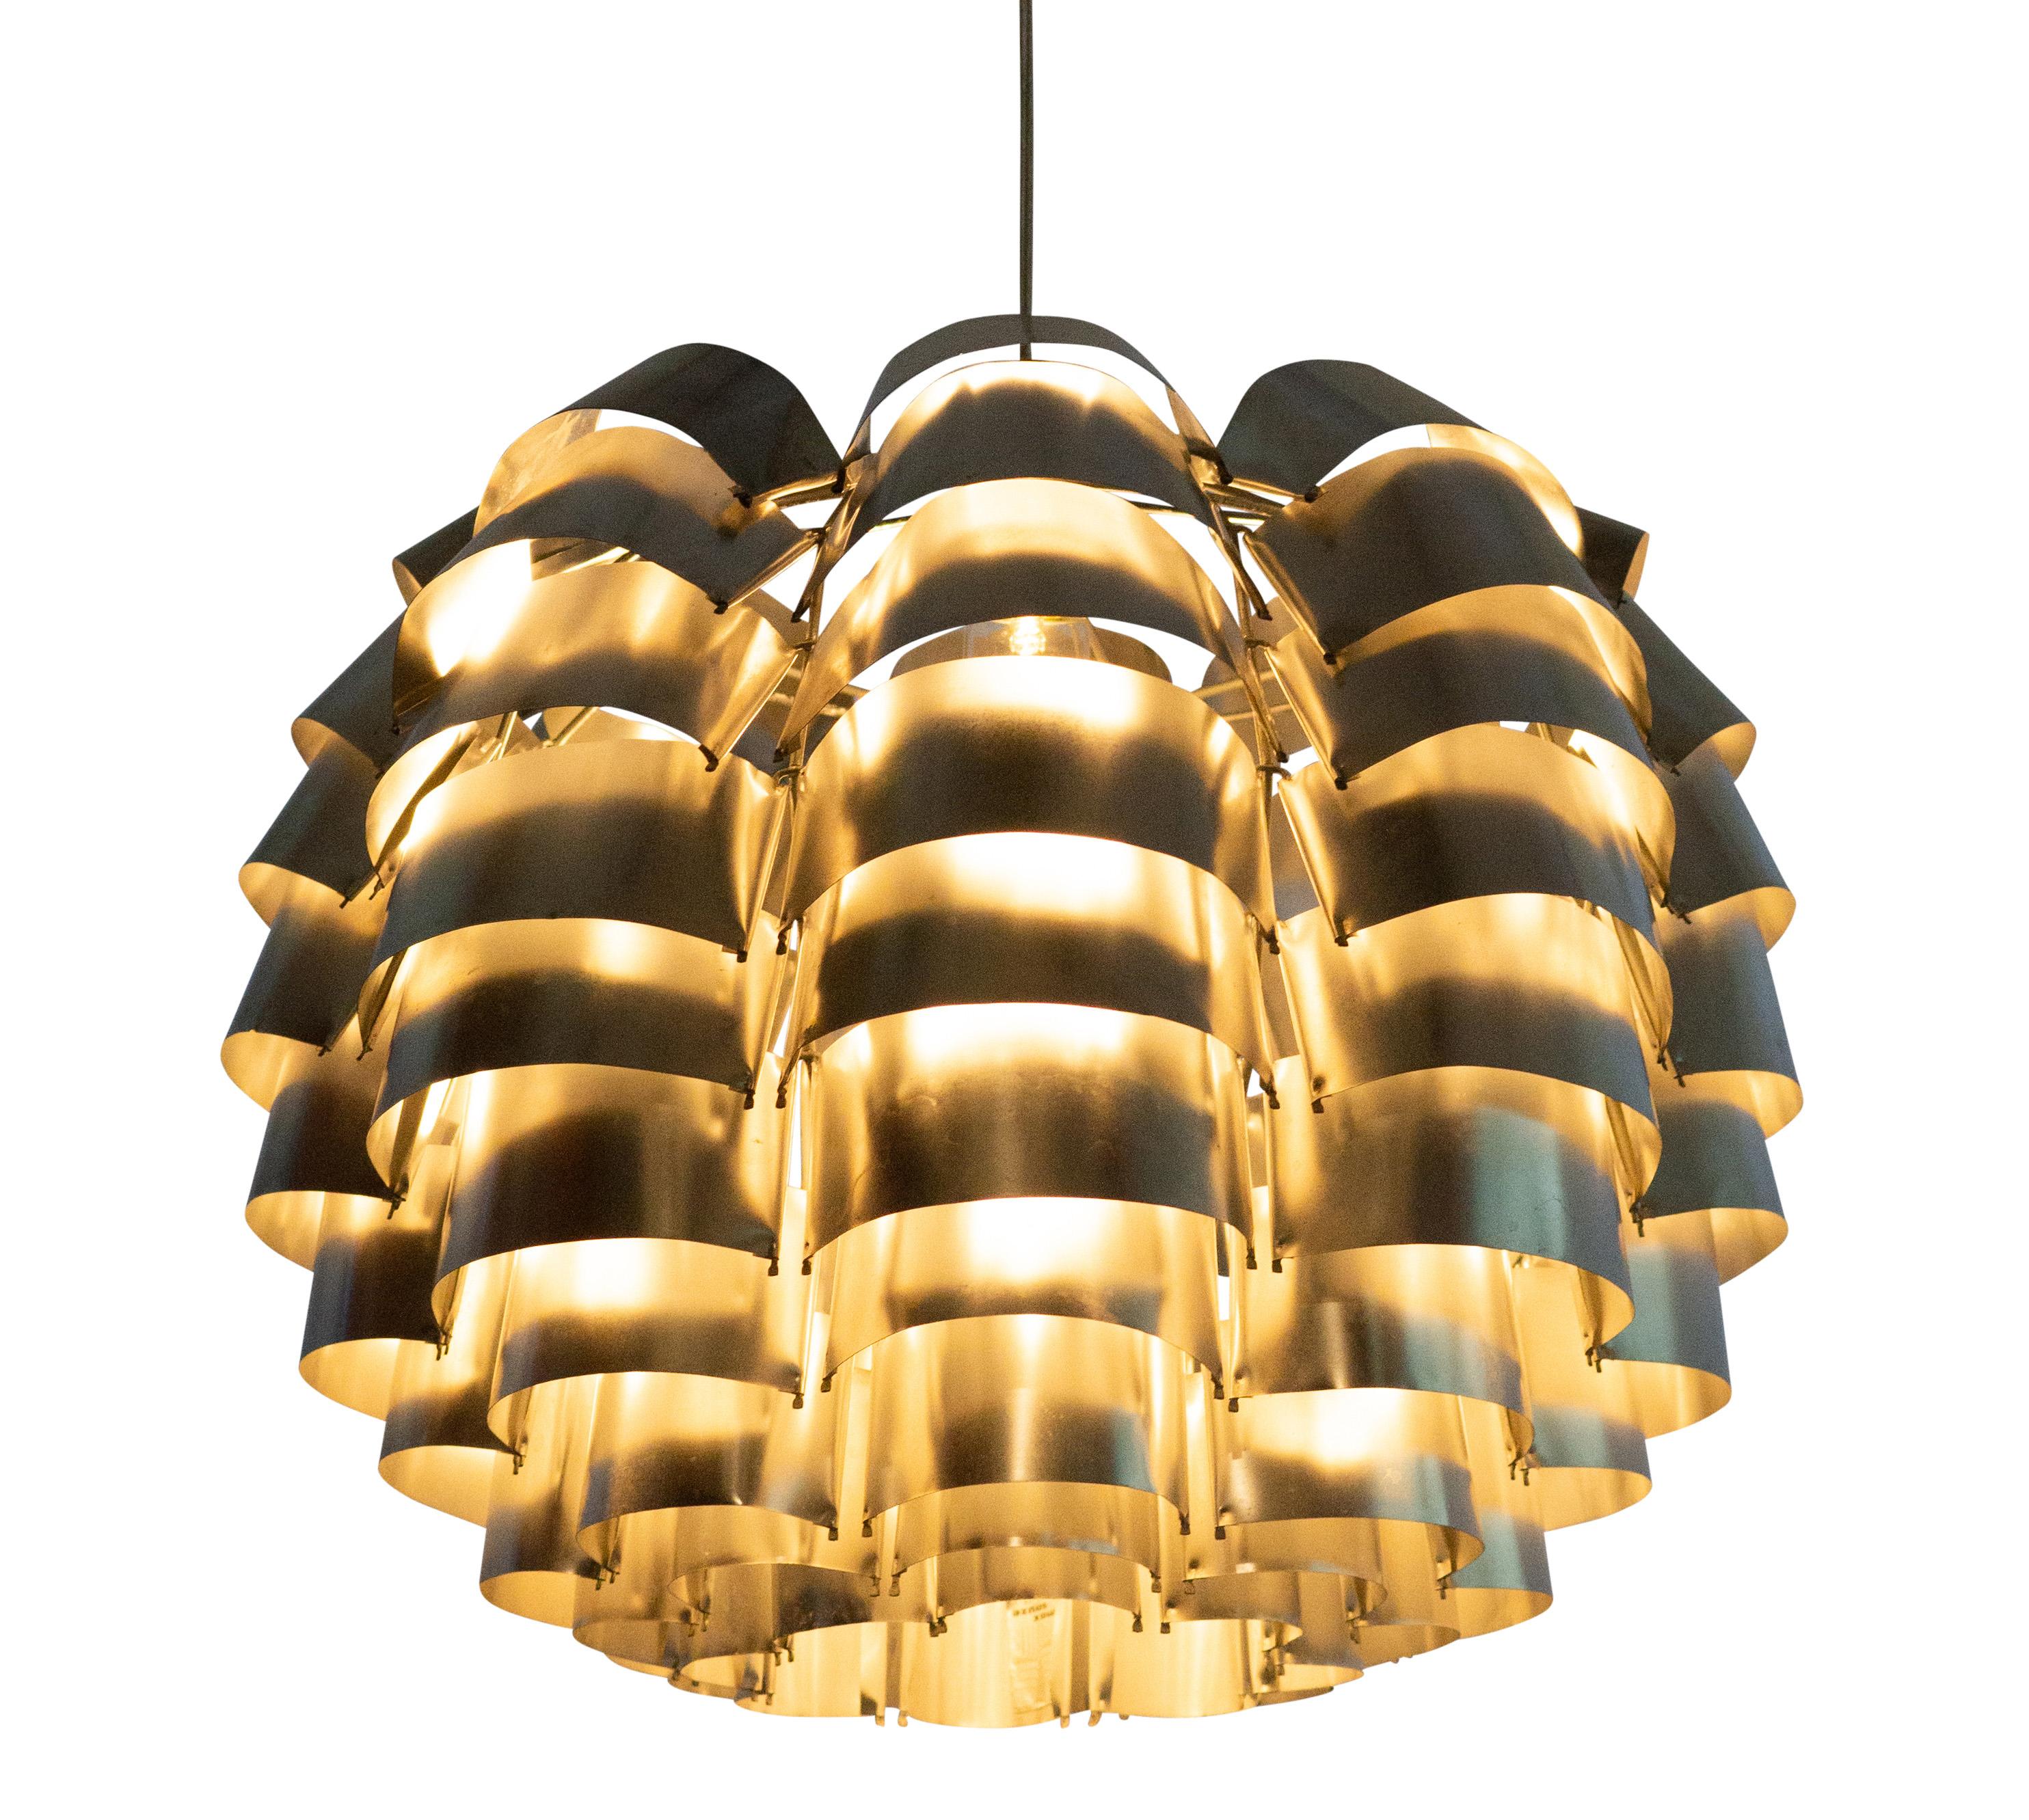 Max Sauze model “Orion” ceiling light. 1969 designed in France by metal craftsman Max Sauze. He is well know in the interior design world for his work with bend metal plates and naming the pieces after zodiacs.